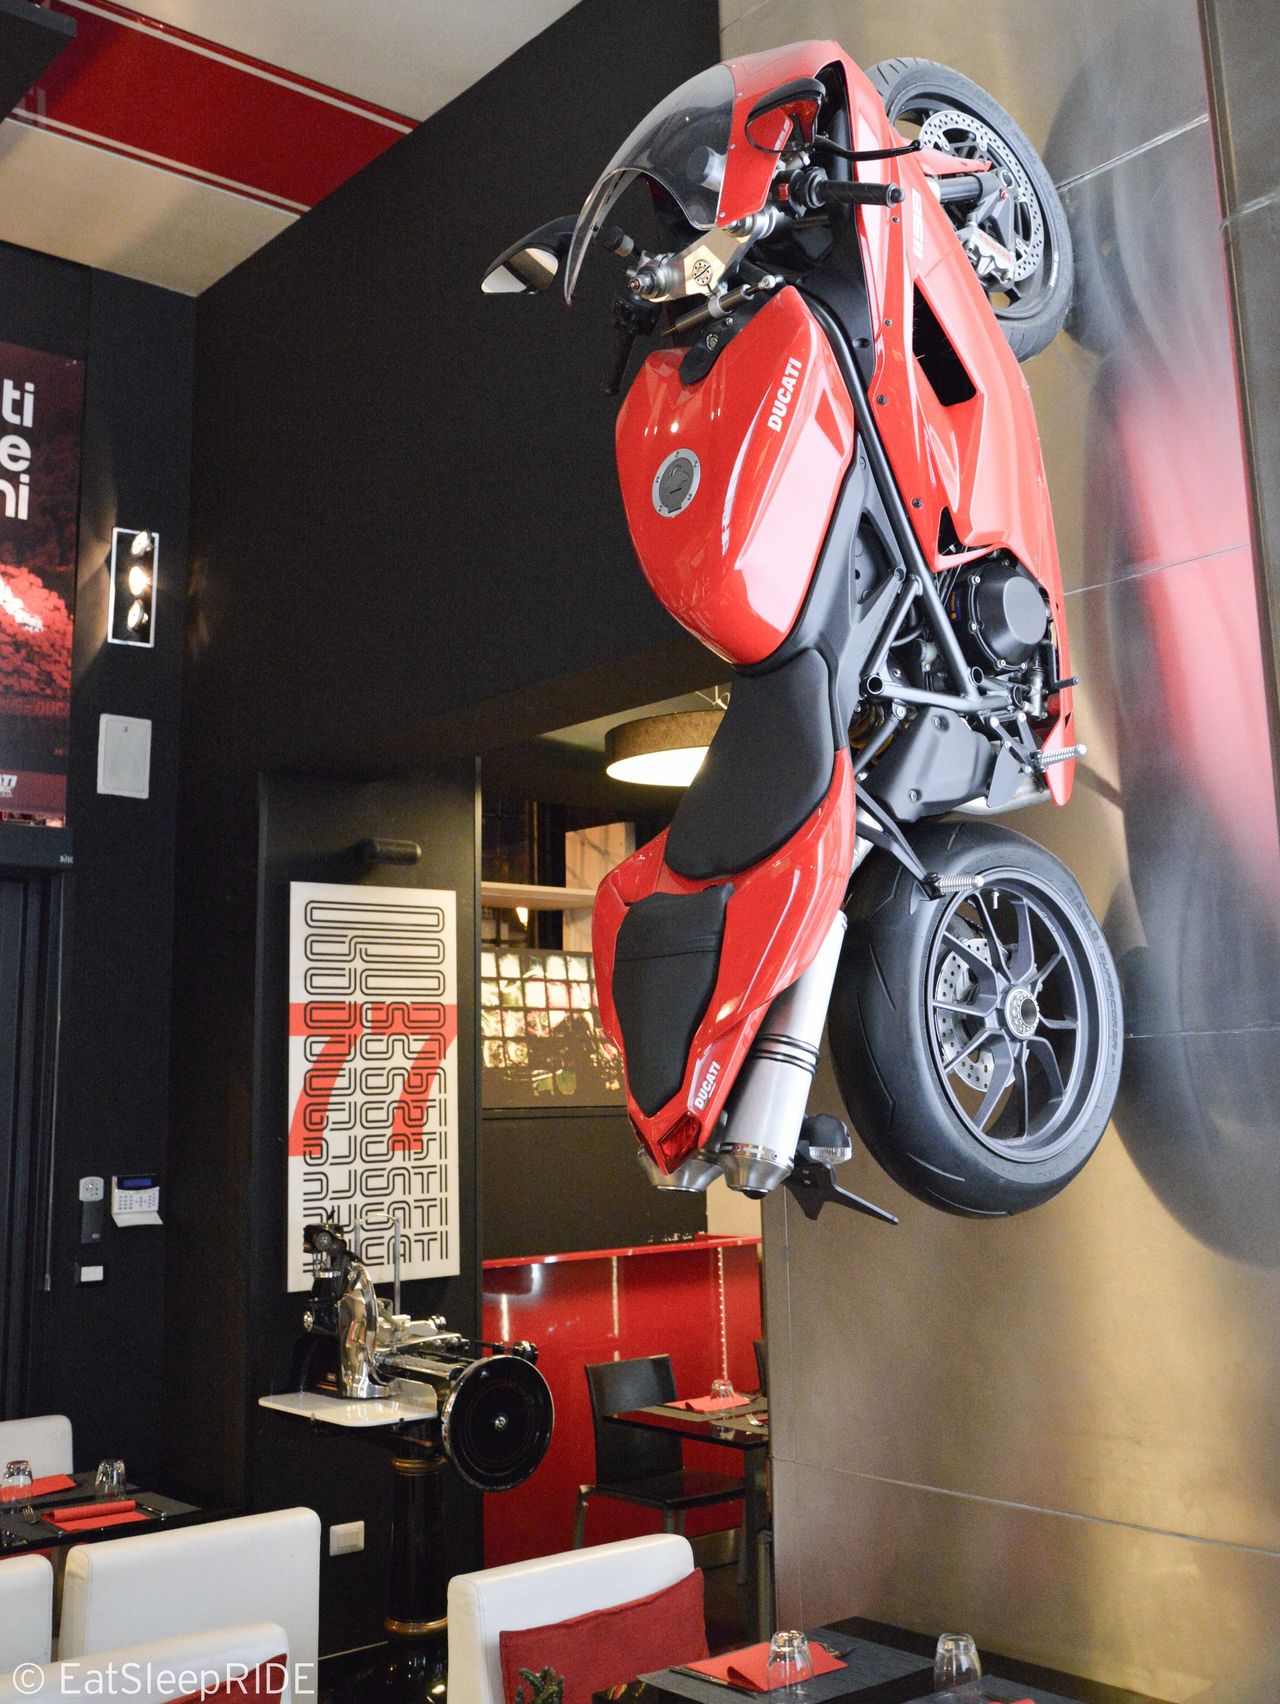 Motorcycle wall hanging at the Ducati Caffè in Roma